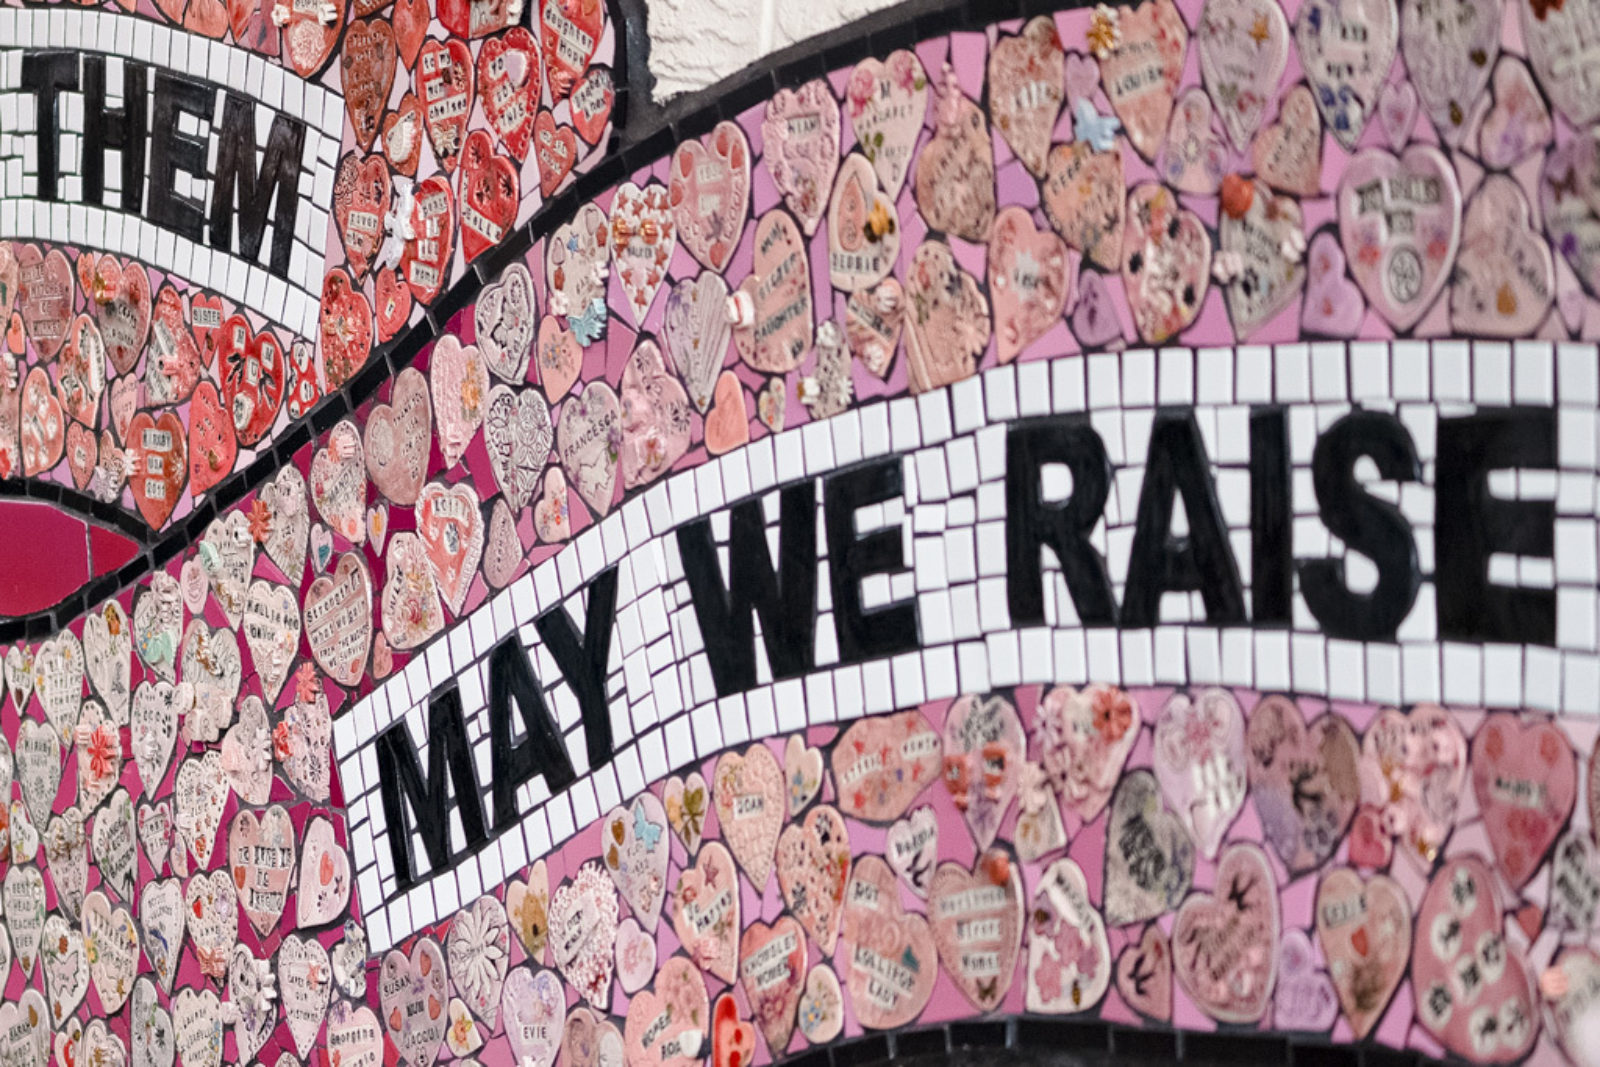 The mural is photographed up close, showing two banner shapes that read ‘May we raise’ surrounded by clay hearts.